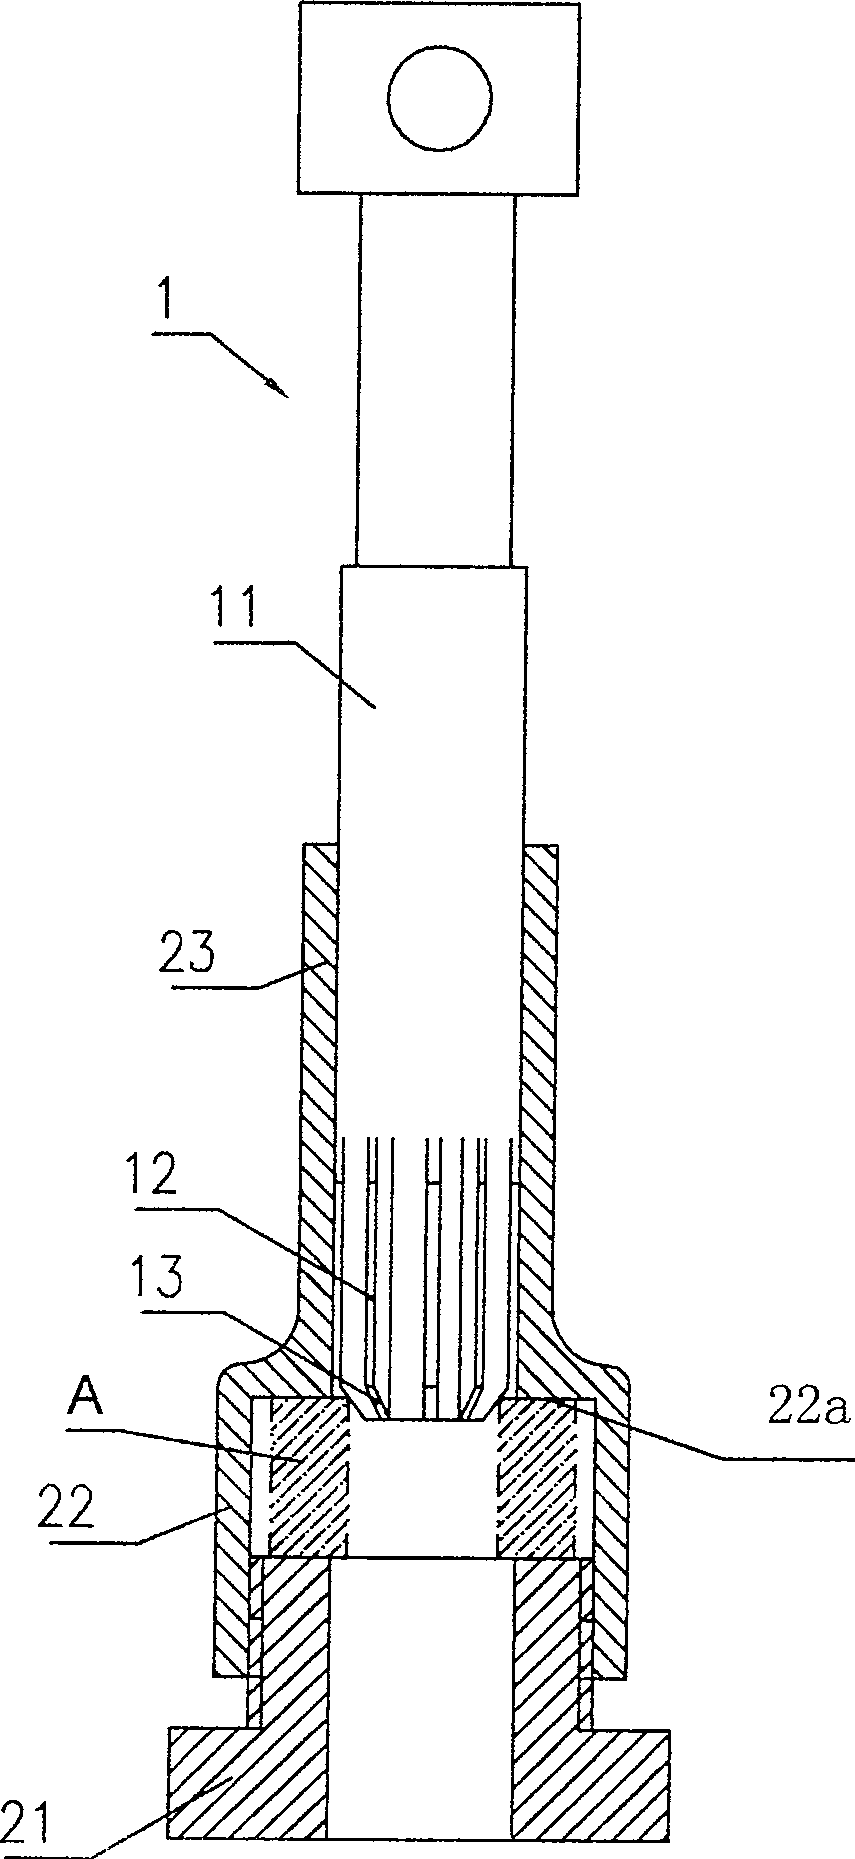 Dedicated clamp for reaming sheath of connecting rod of engine